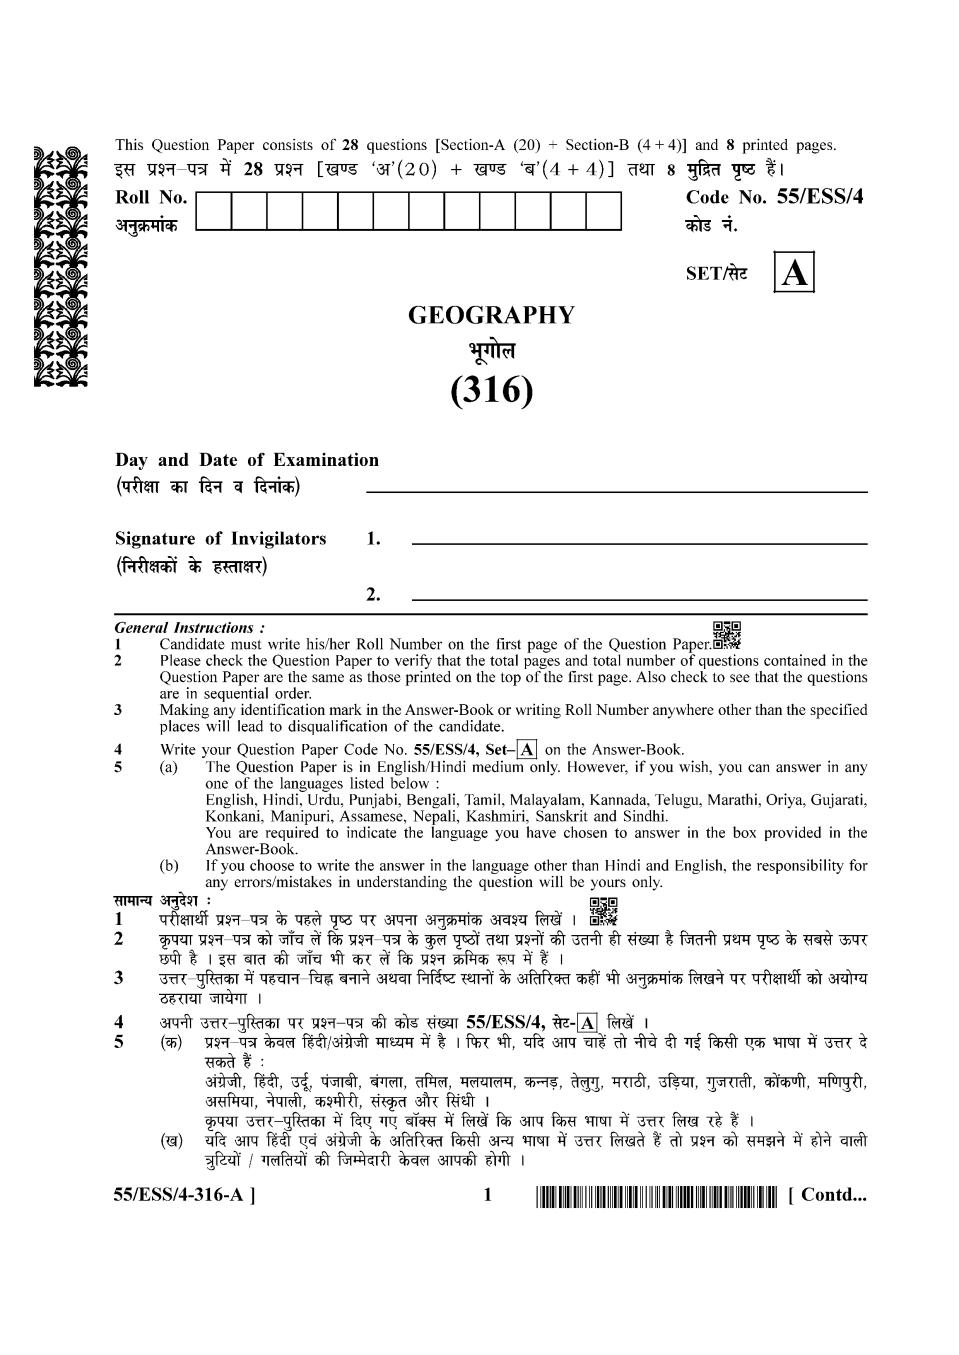 NIOS Class 12 Question Paper Oct 2017 - Geography - Page 1